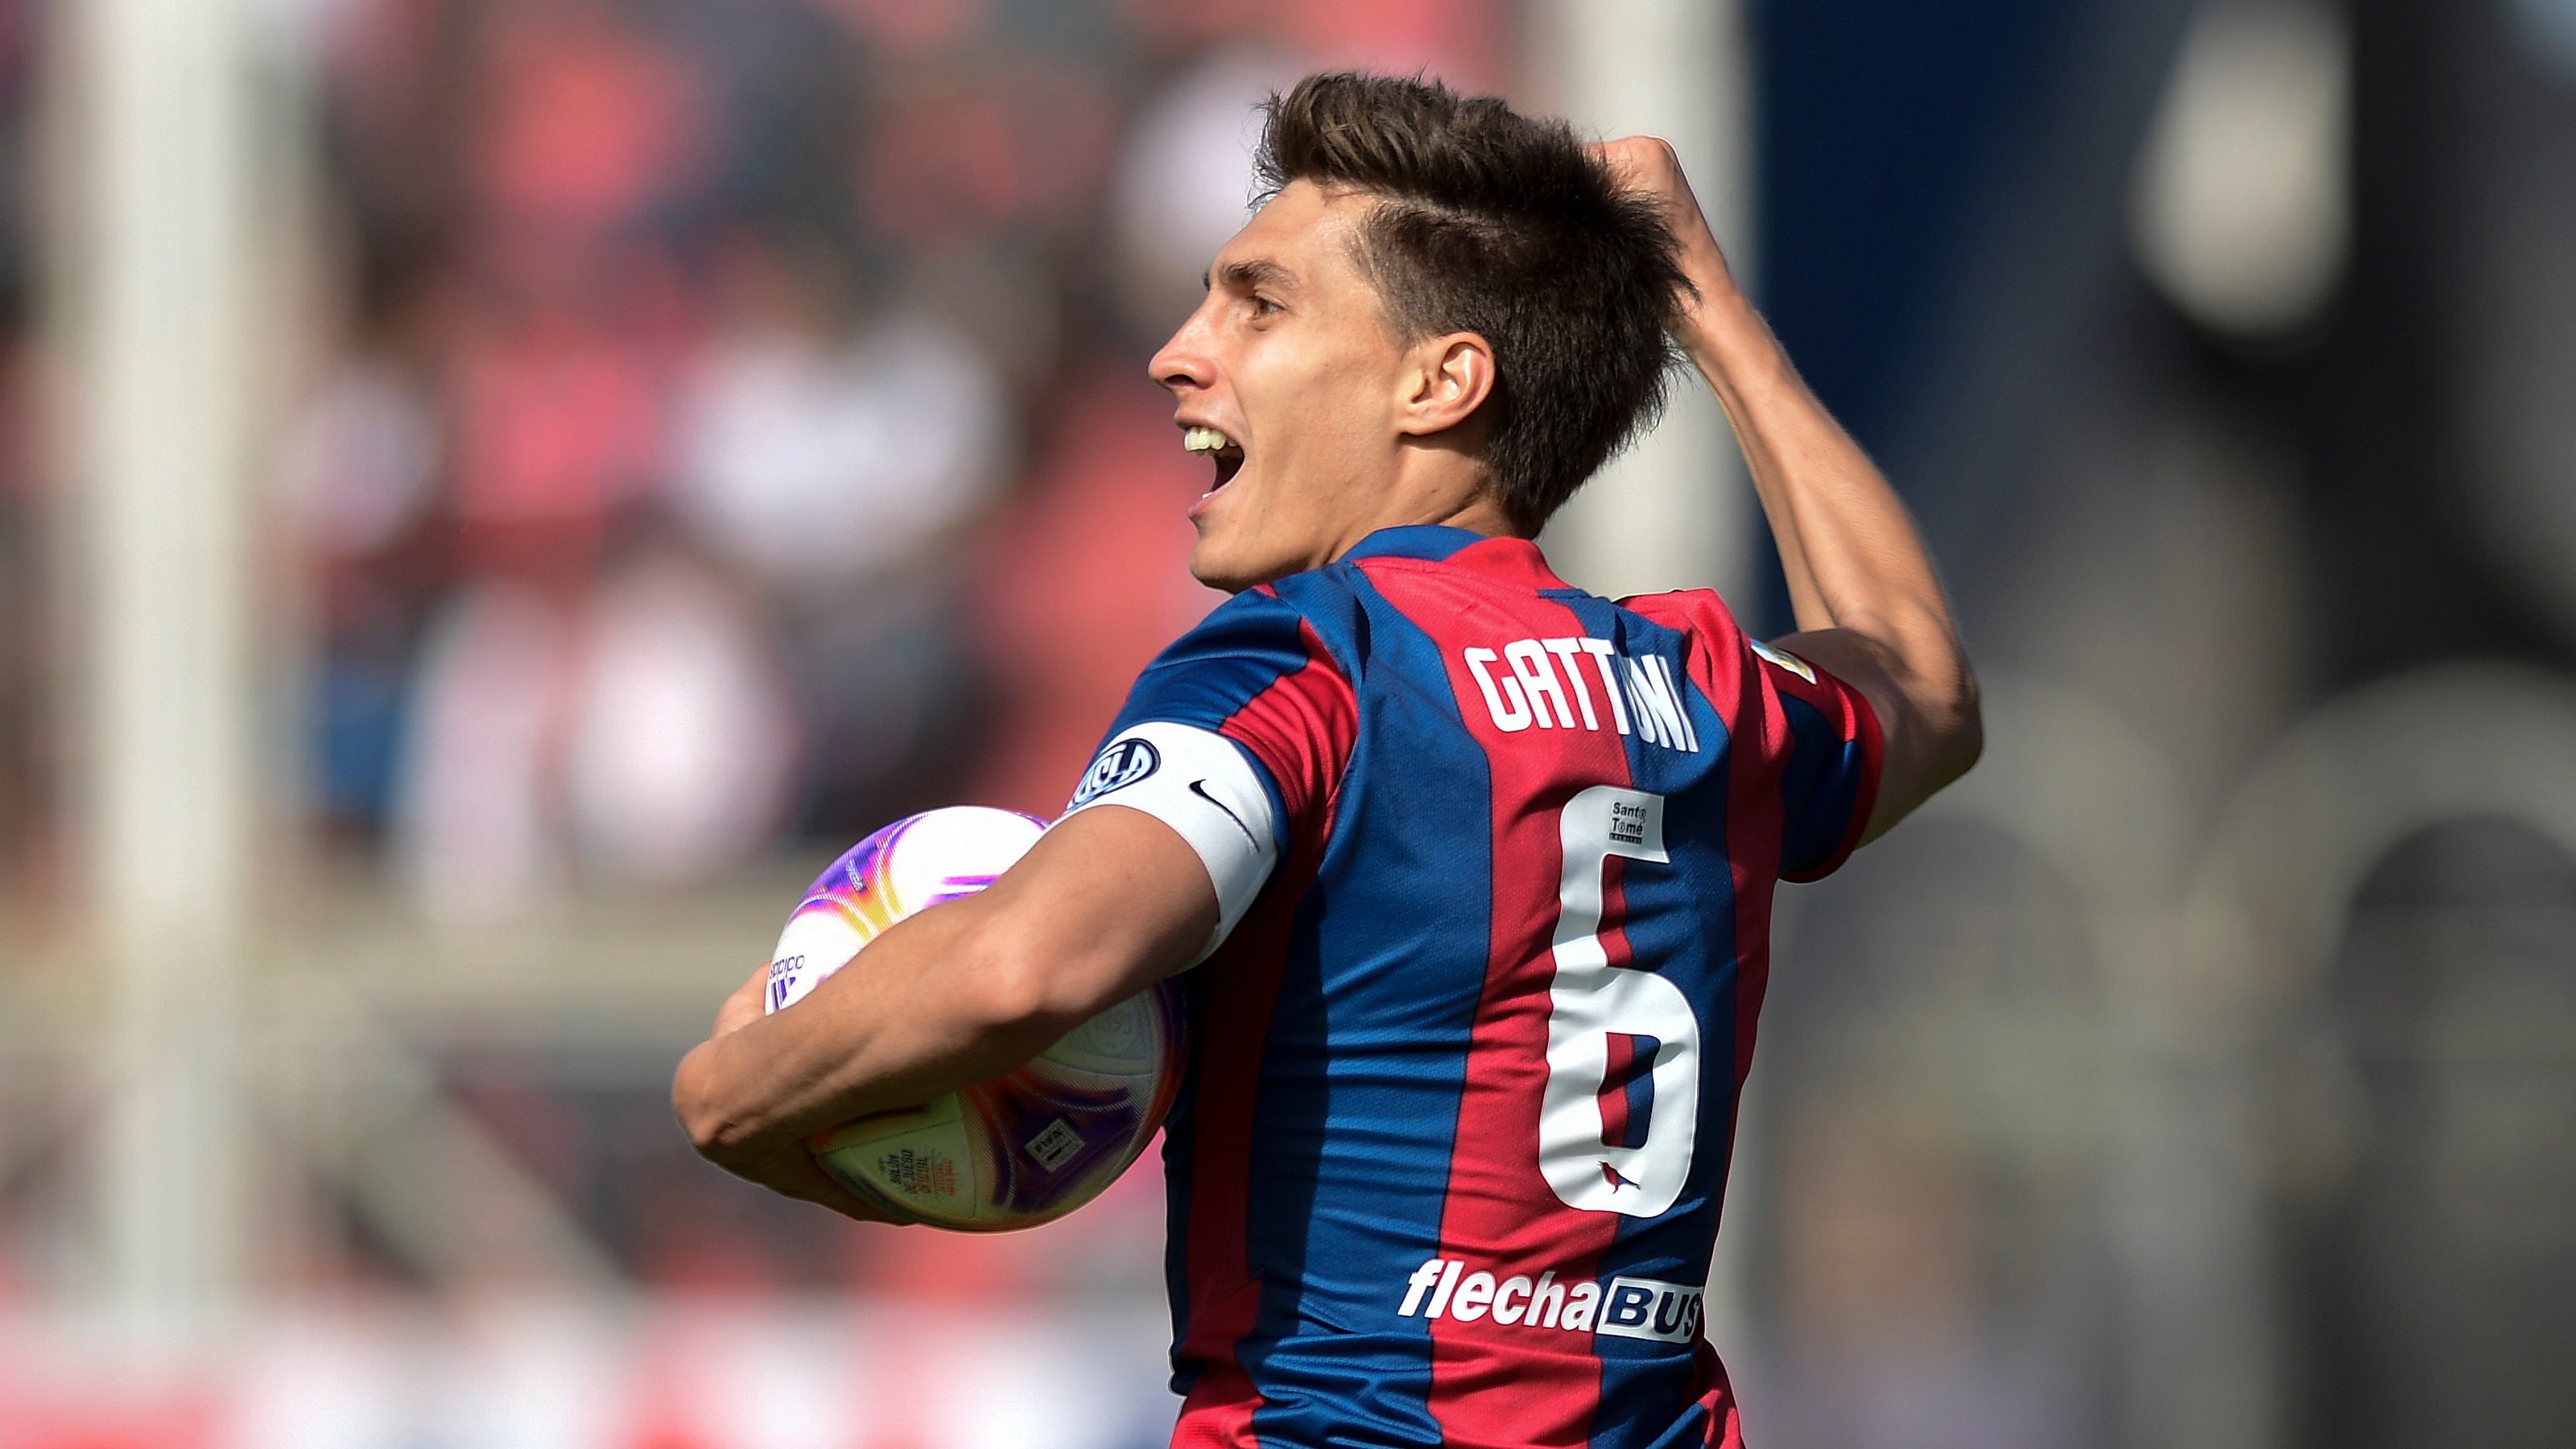 BUENOS AIRES, ARGENTINA - AUGUST 27: Federico Gattoni of San Lorenzo celebrates after scoring his team's first goal during a match between San Lorenzo and Rosario Central as part of Liga Profesional 2022 at Pedro Bidegain Stadium on August 27, 2022 in Buenos Aires, Argentina. (Photo by Gustavo Garello/Jam Media/Getty Images)